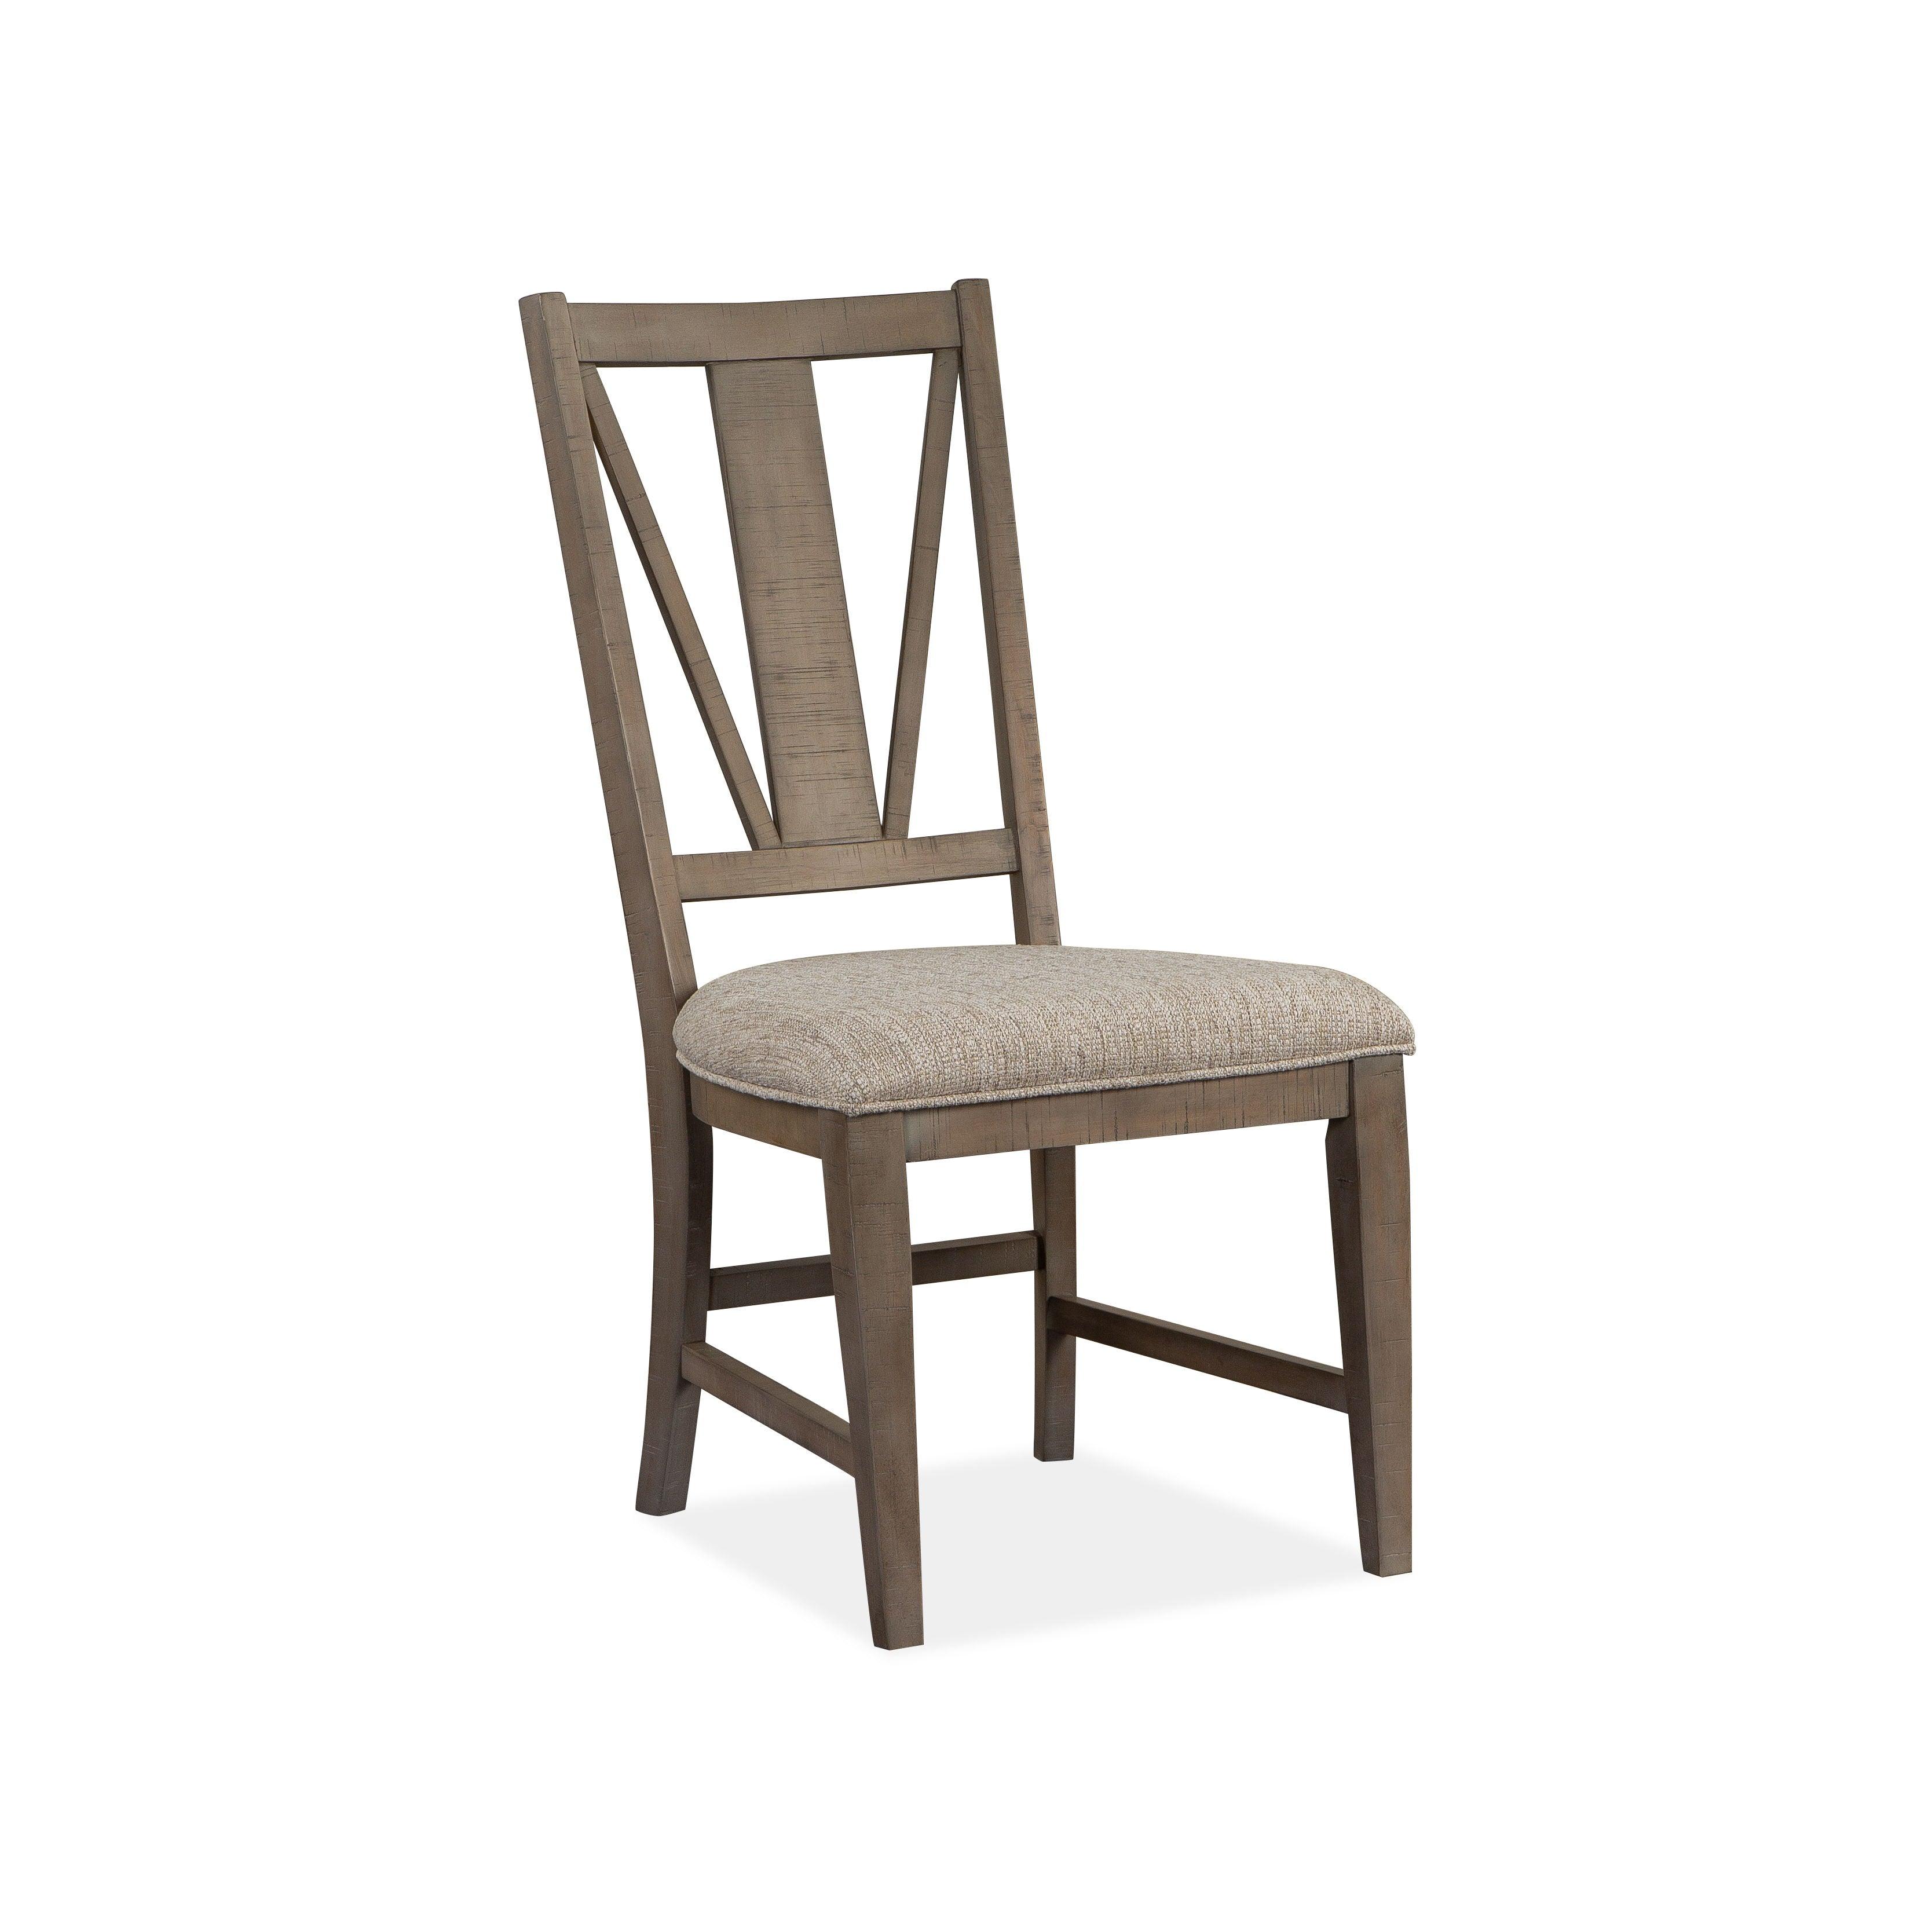 Magnussen Furniture - Paxton Place - Dining Side Chair With Upholstered Seat (Set of 2) - Dovetail Grey - 5th Avenue Furniture